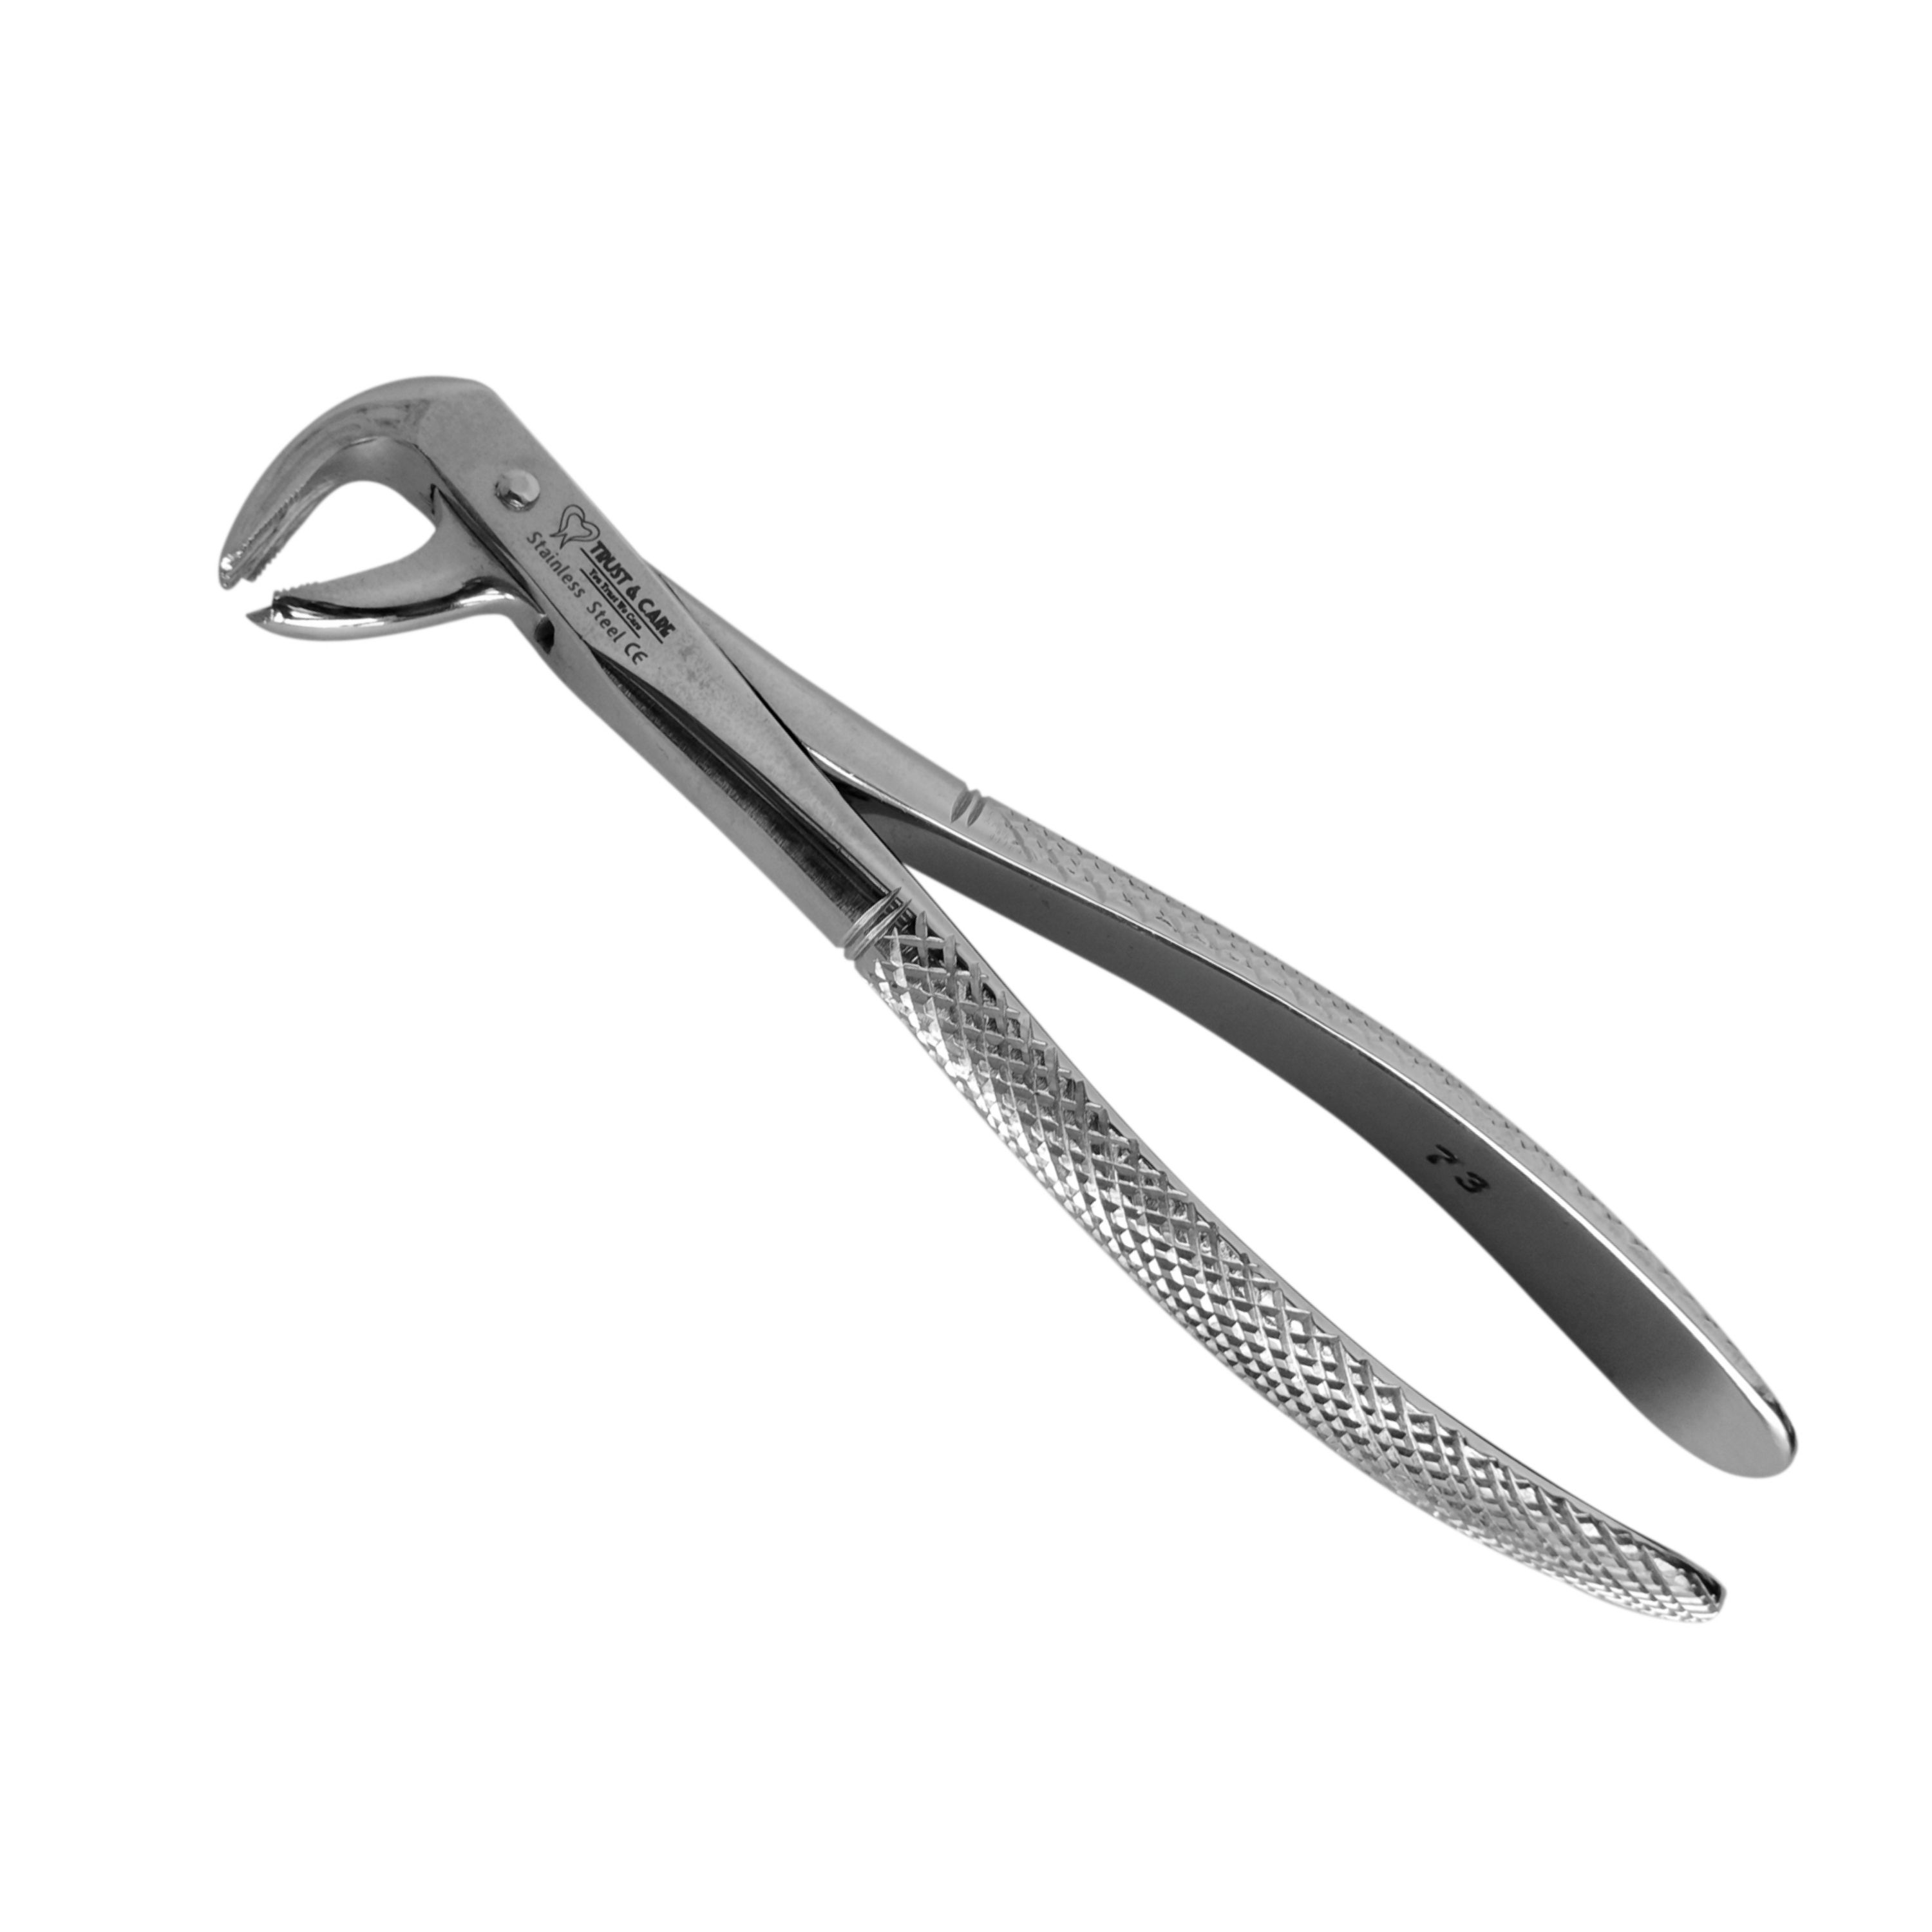 Trust & Care Tooth Extraction Forcep Lower Molars Fig No. 22 Standard